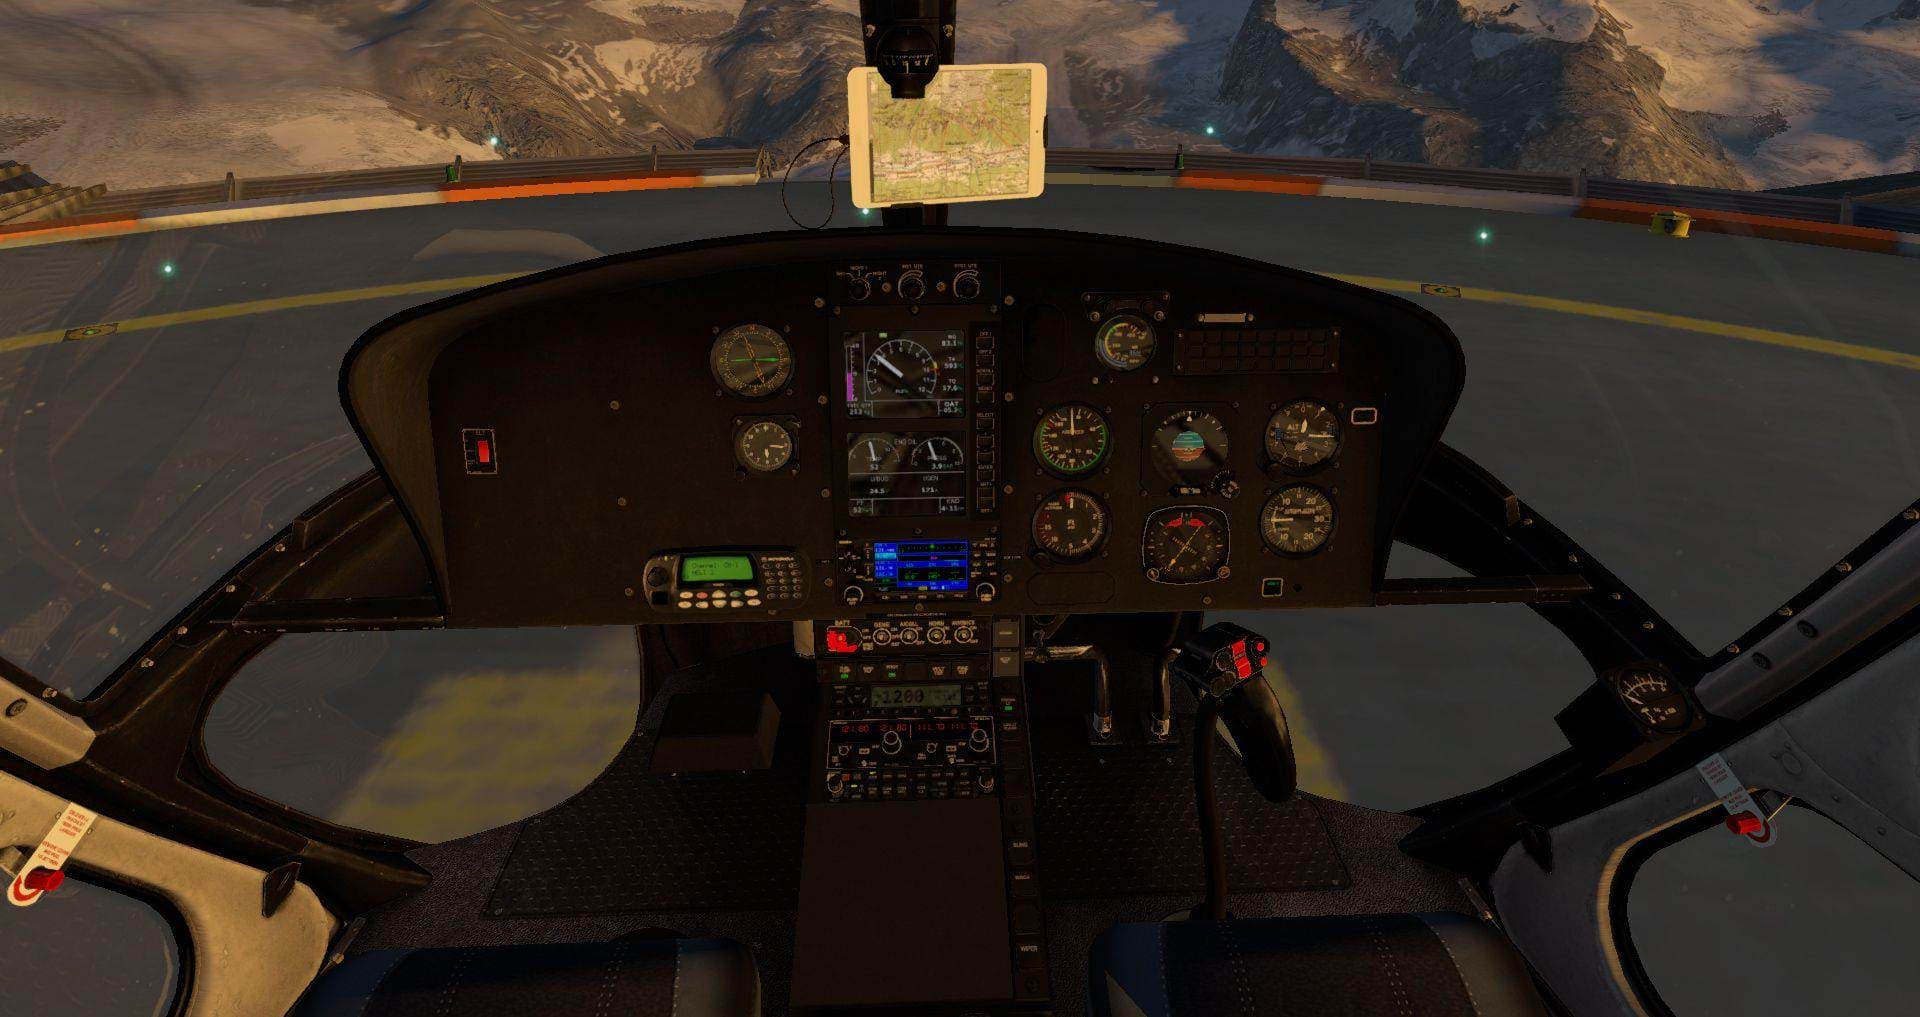 SwissCreations Pack for DreamFoil Creations AS350B3e cockpit